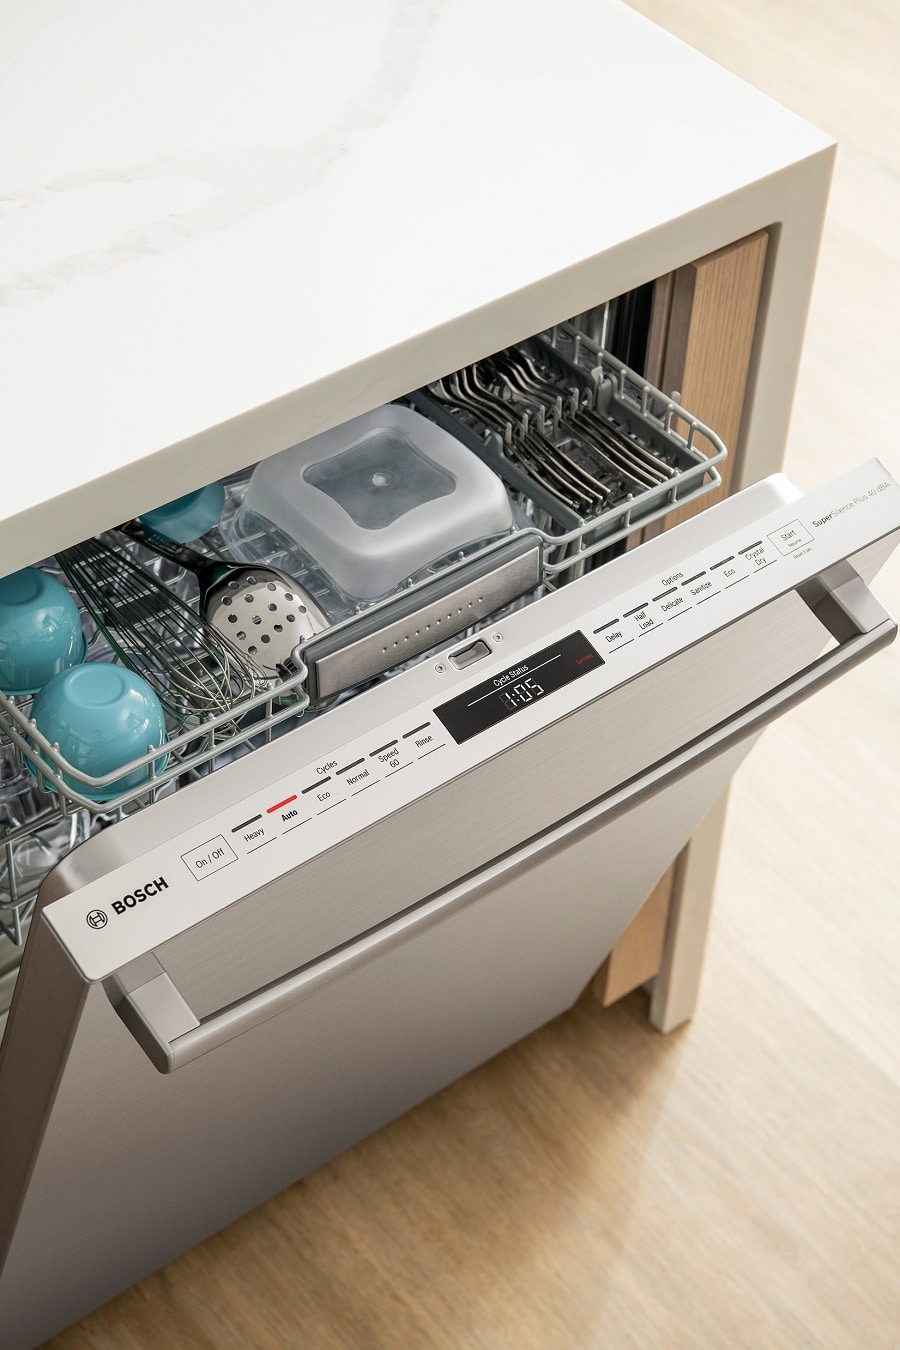 The New Bosch 800 Series Dishwasher With New CrystalDry™ Is Now Available At Best Buy